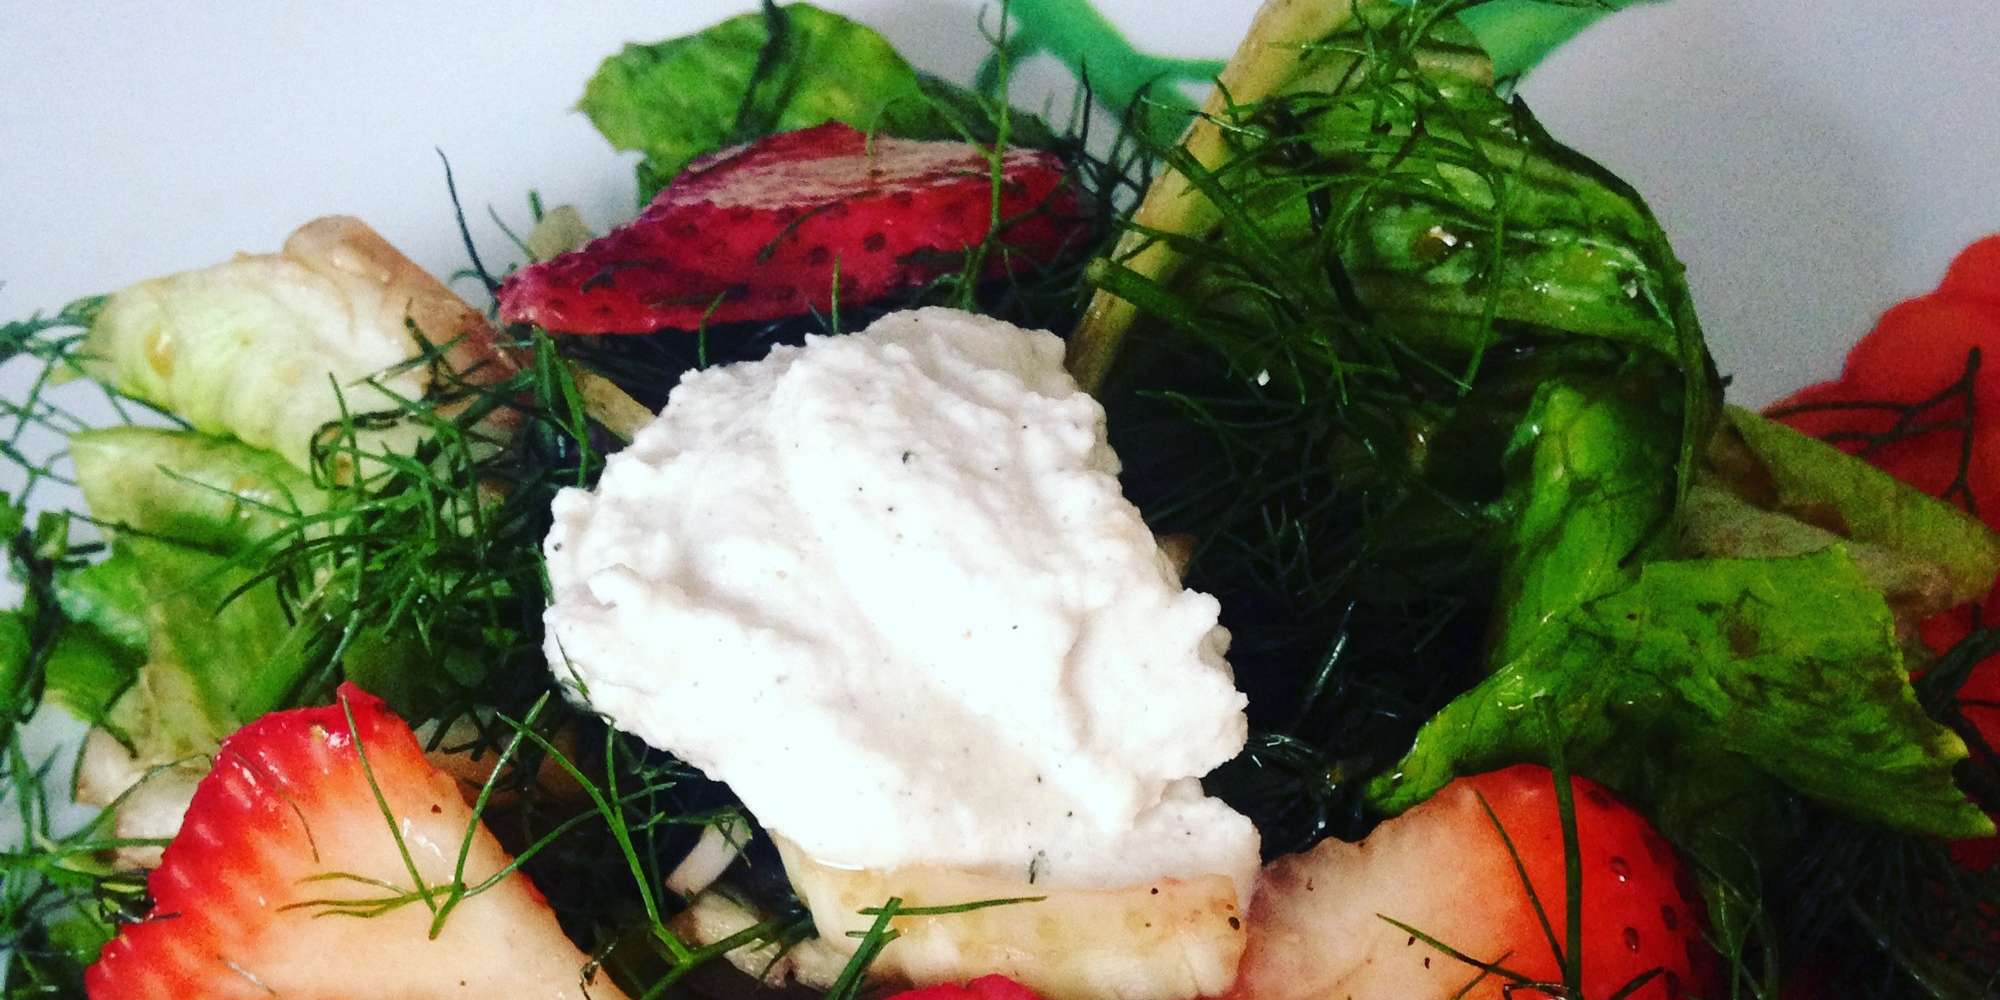 Strawberry and Fennel Salad with Almond Cheese